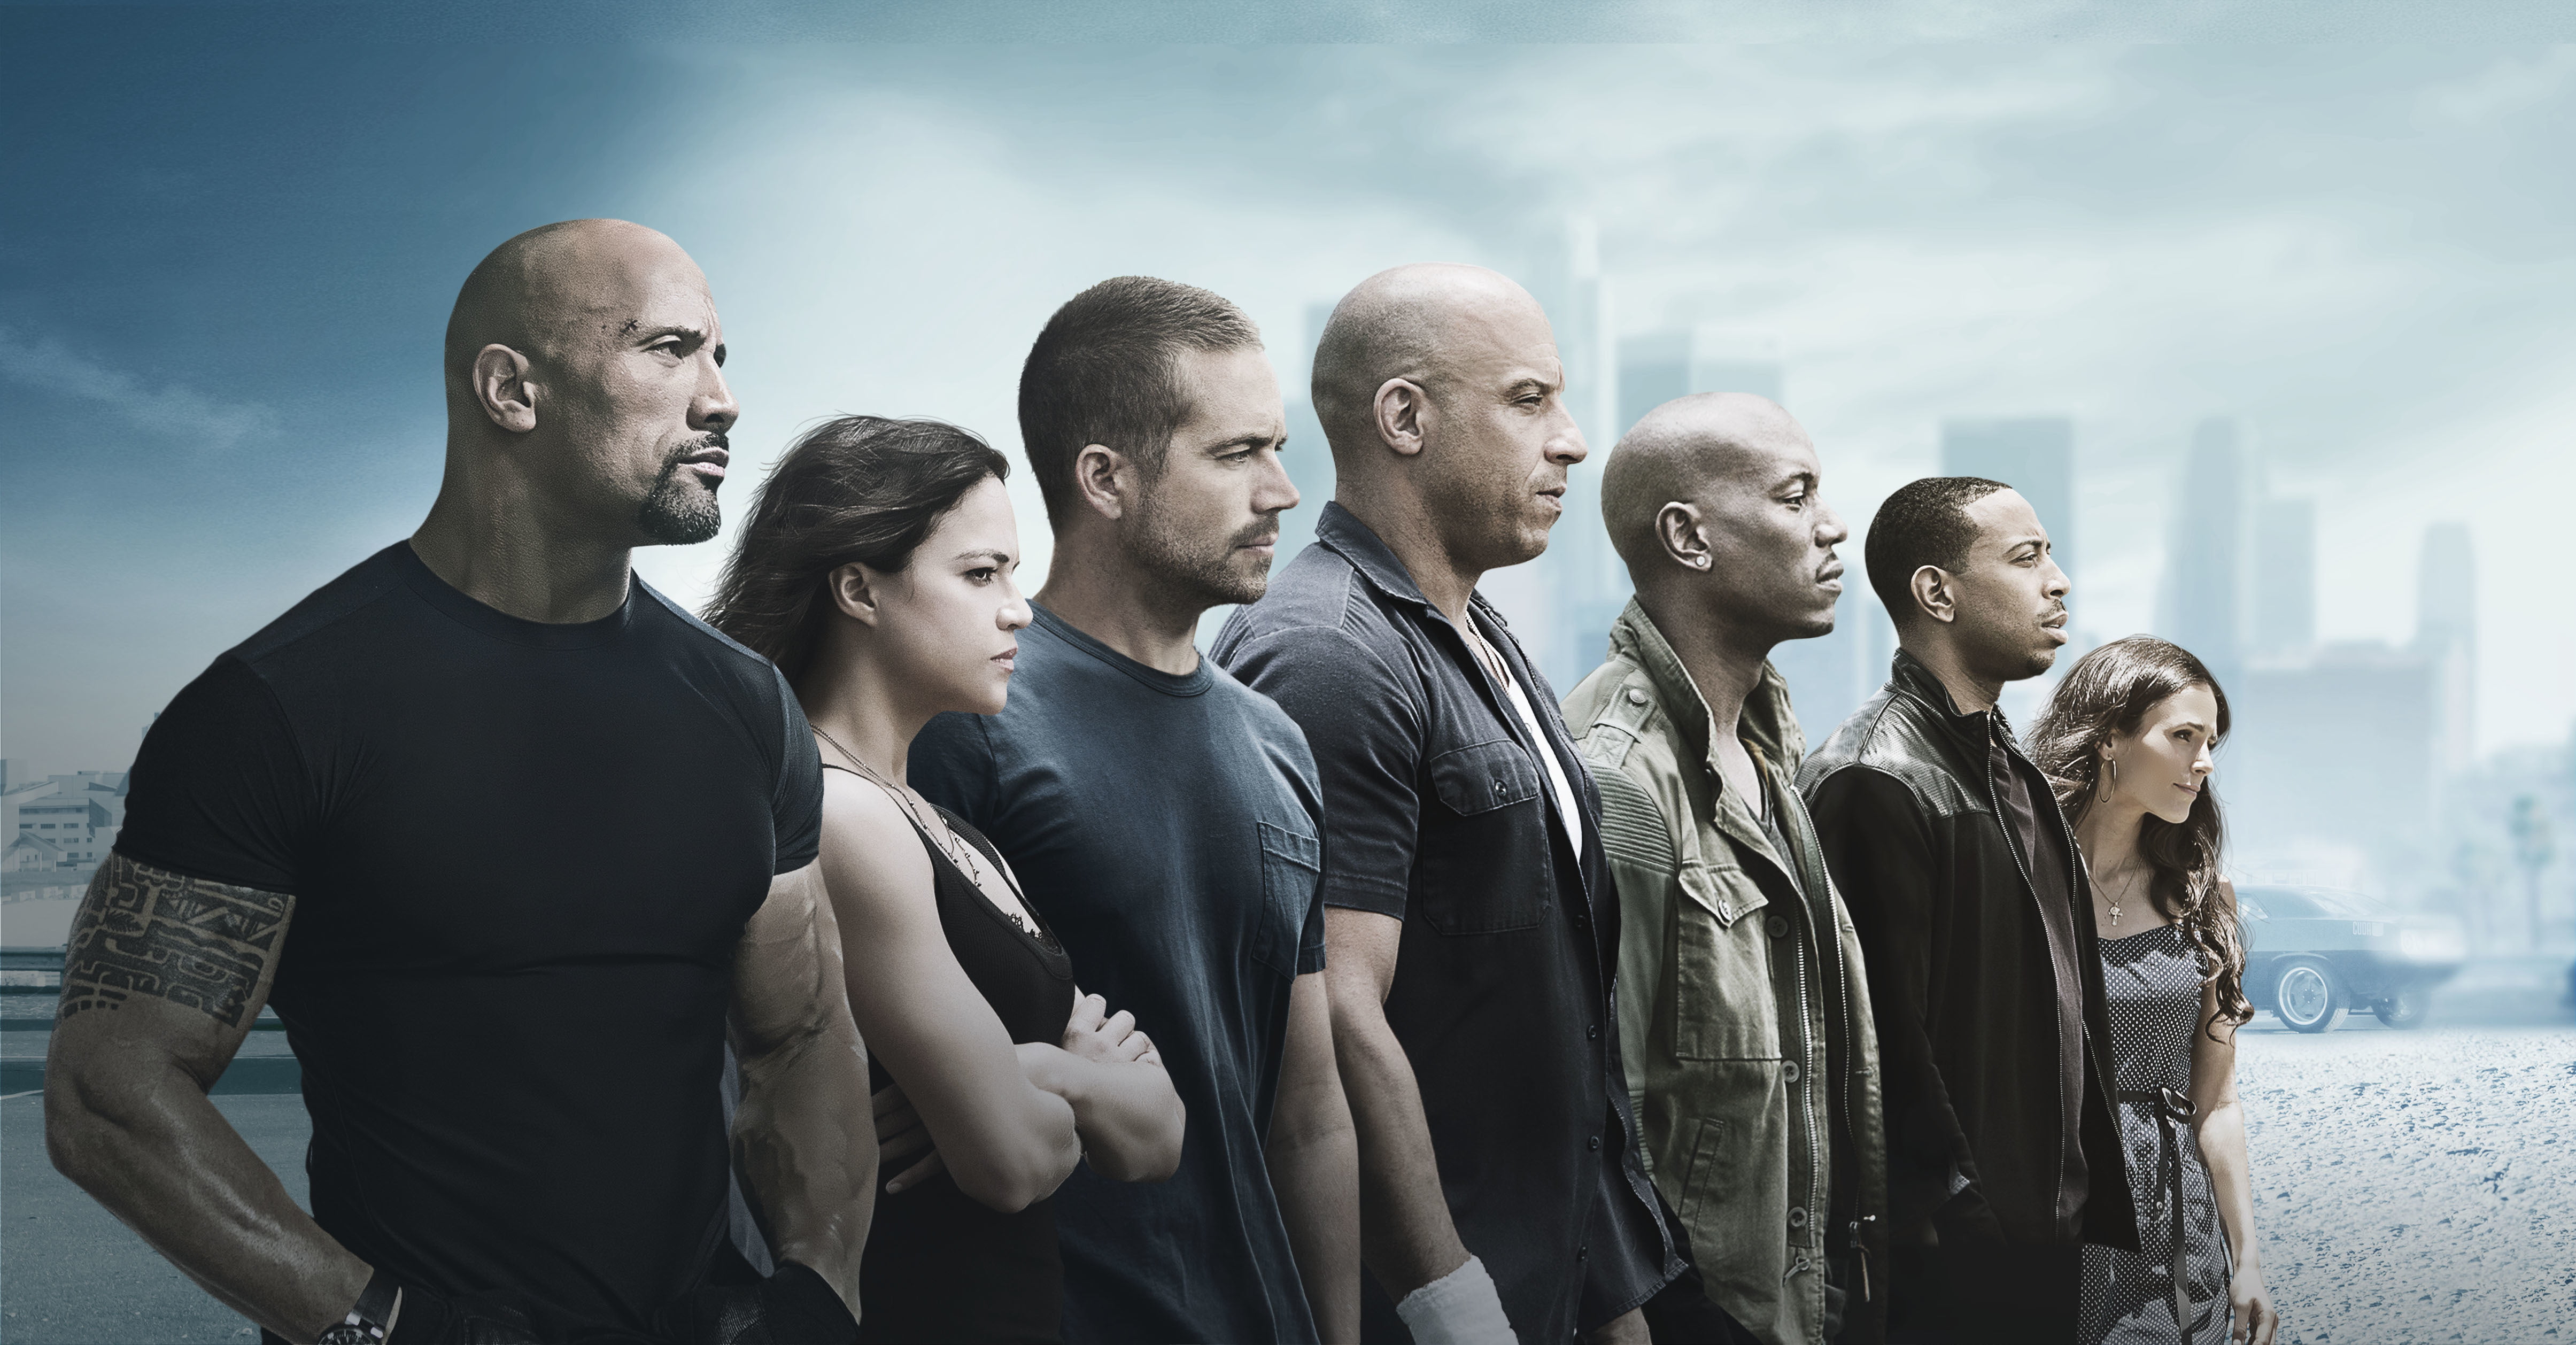 Wallpaper ID 308018  Movie Fast and Furious 9 Phone Wallpaper Mia  Toretto Ludacris Ramsey Fast and Furious Nathalie Emmanuel 1440x3120  free download